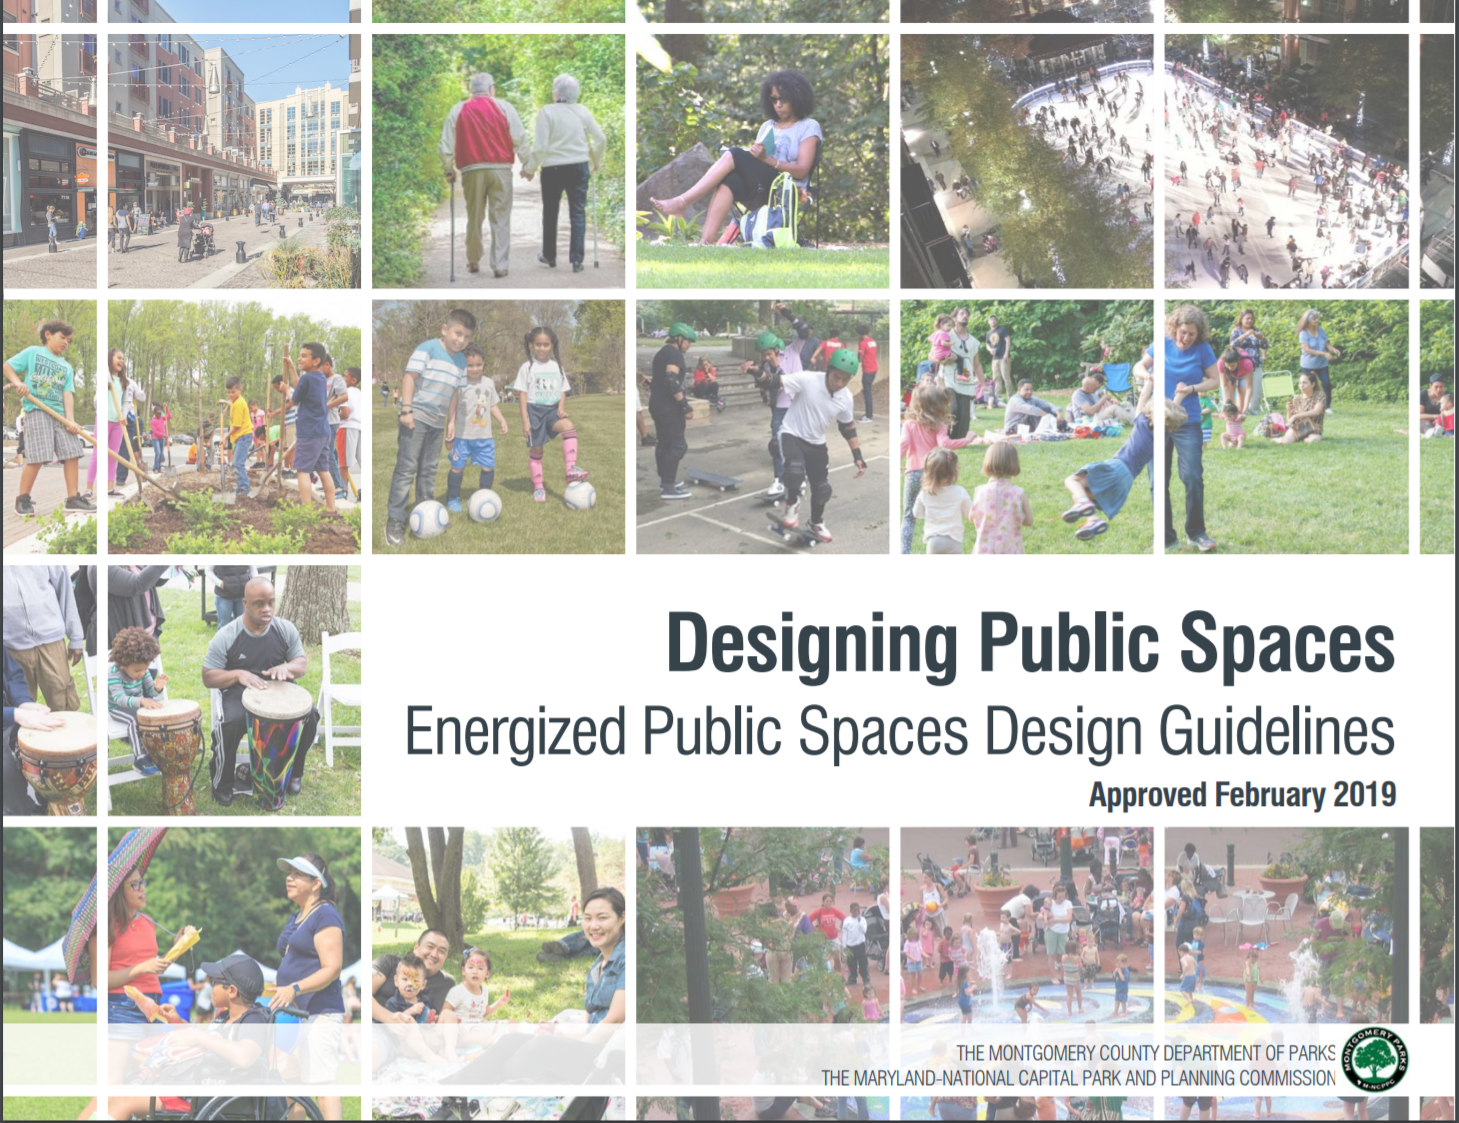 Cover page of the Energized Public Spaces (EPS) Design Guidelines Appendix. It is illustrated with images of people recreating in parks and open spaces.